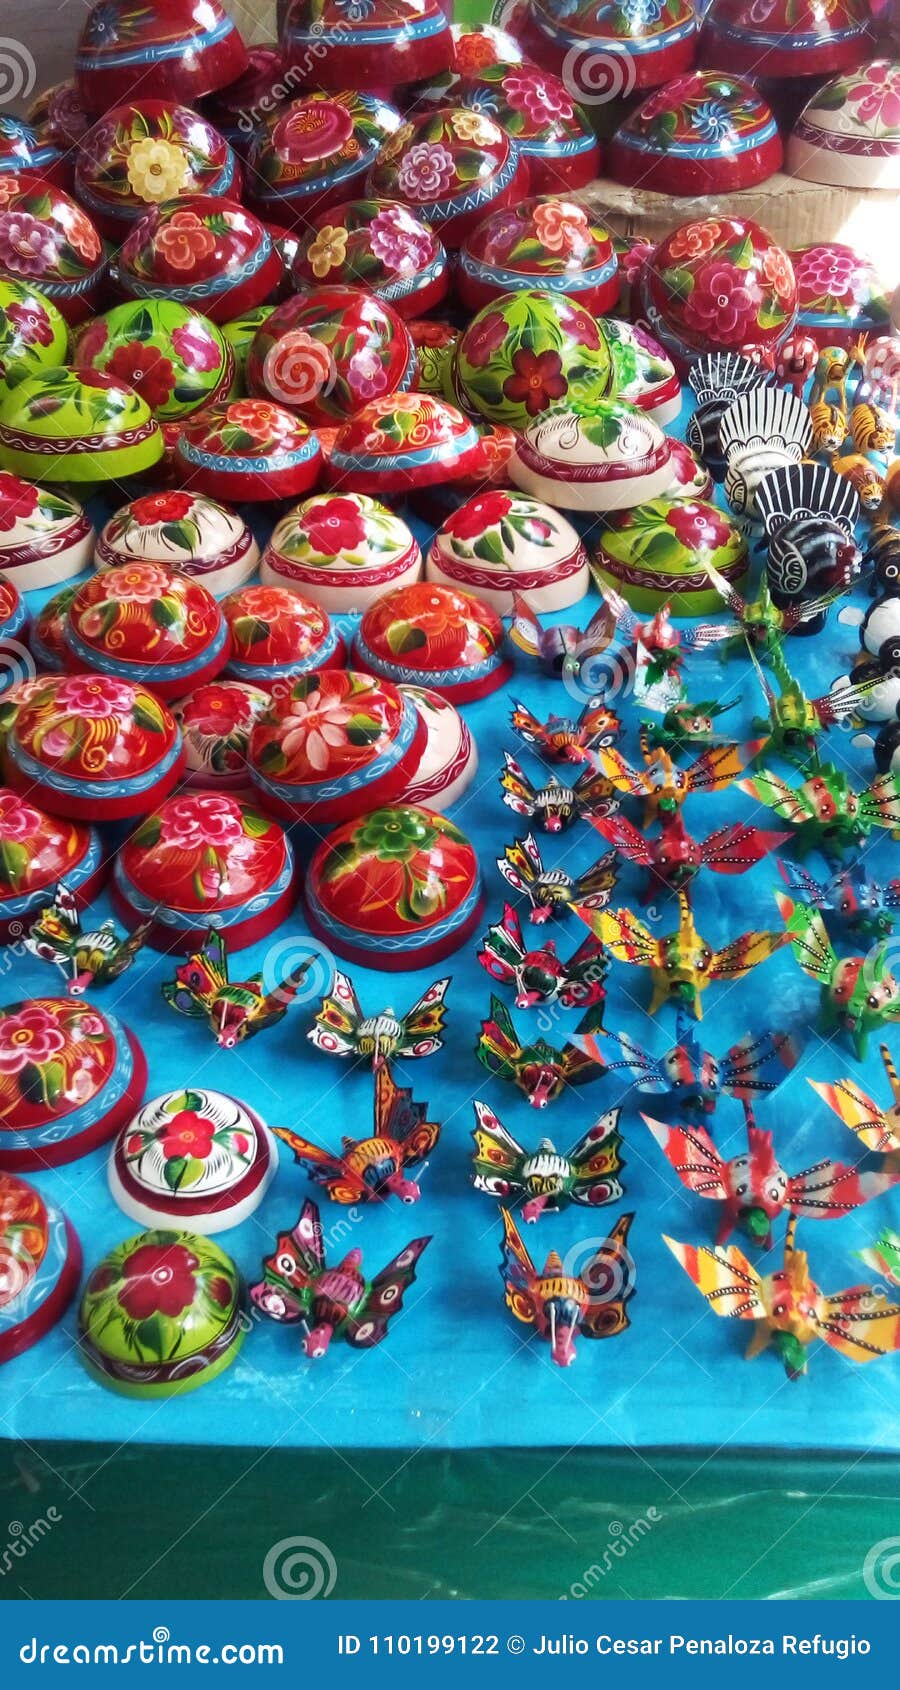 beautiful and colorful crafty cocos and car stances sold in quetzala, guerrero, mexico